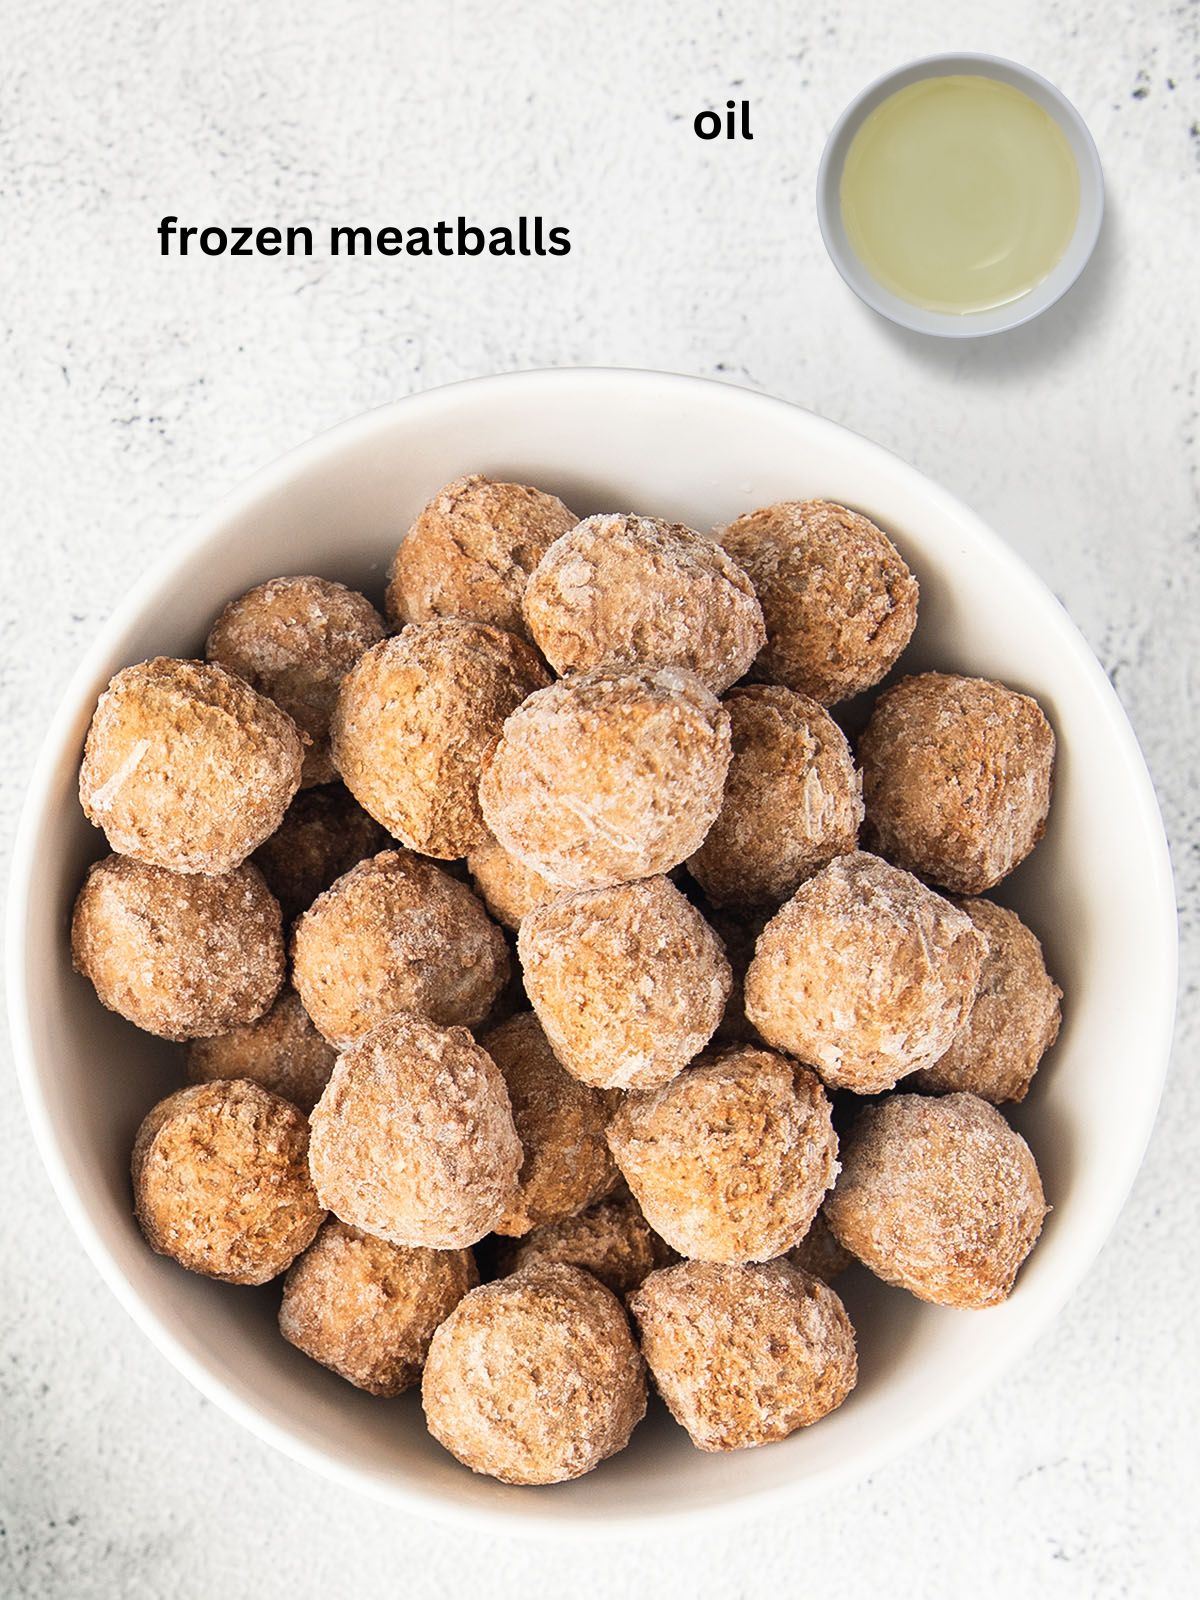 frozen meatballs and a small bowl with cooking oil.